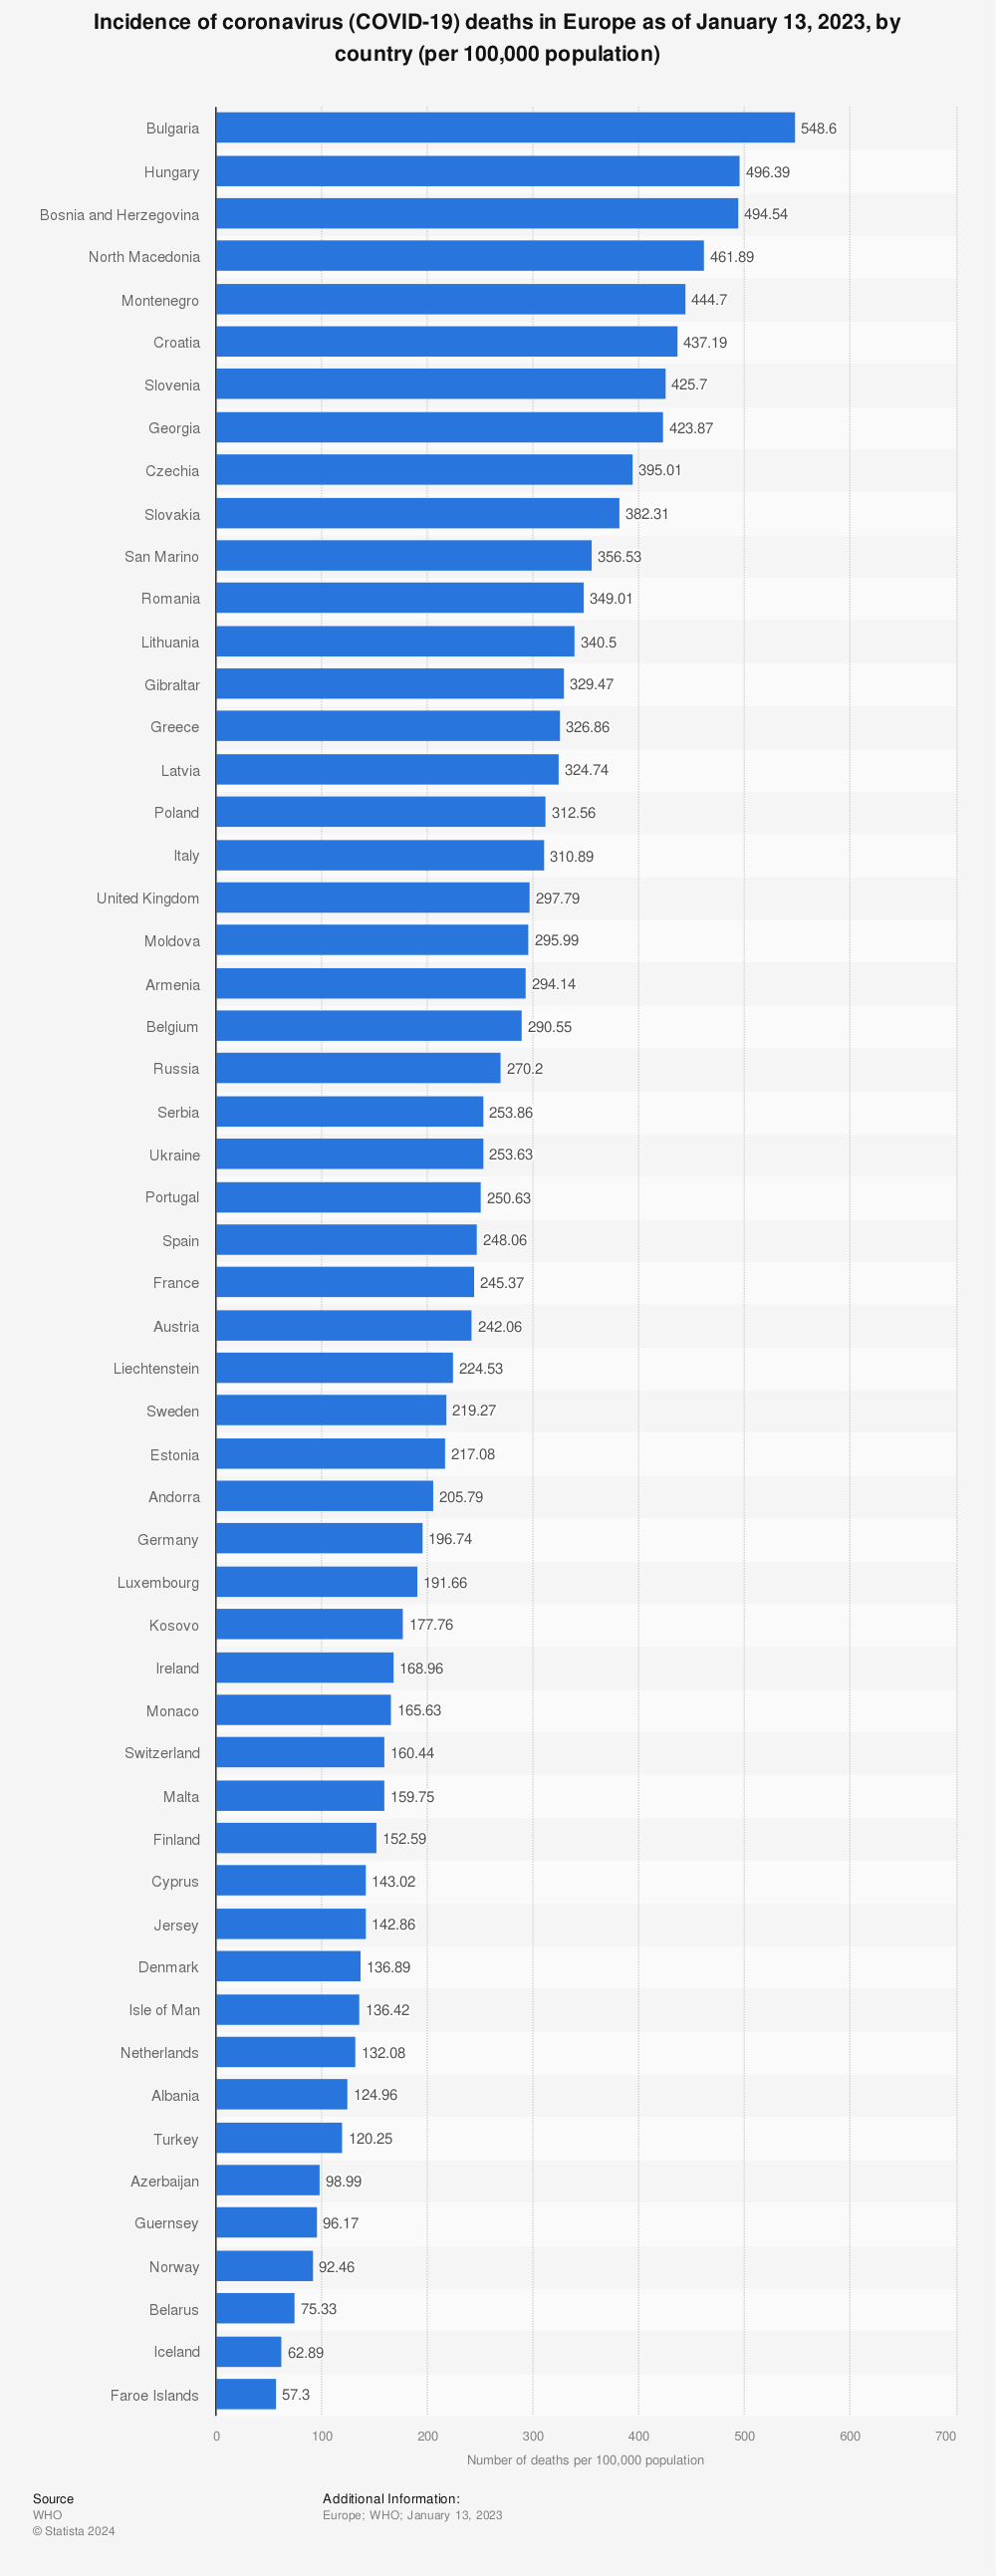 Statistic: Incidence of coronavirus (COVID-19) deaths in Europe as of August 19, 2022, by country (per 100,000 population) | Statista